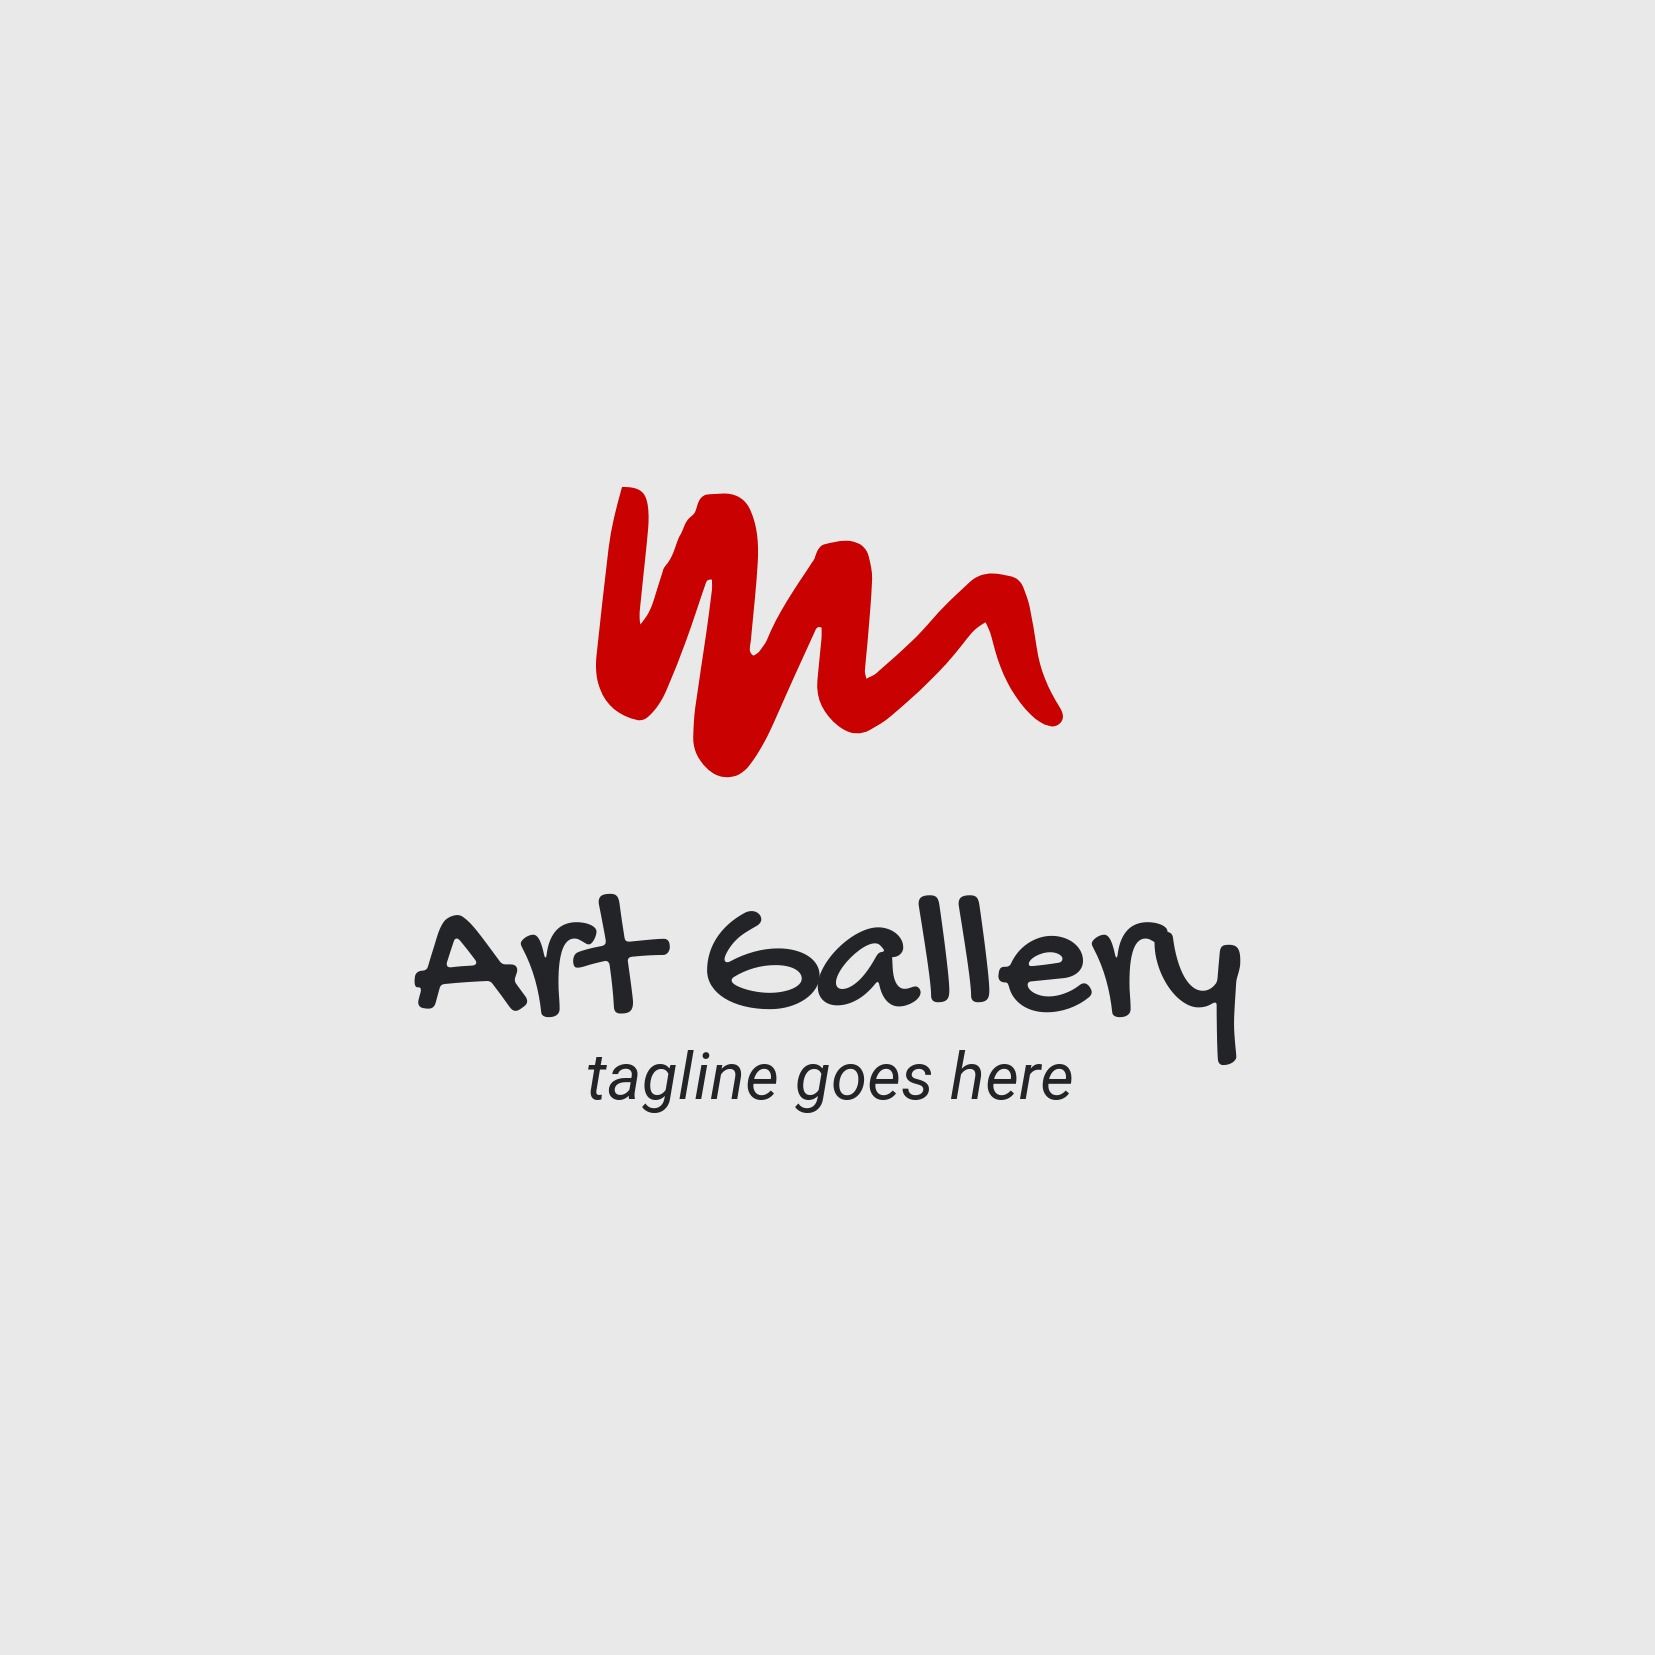 Art gallery logo with red brush stroke - Gochi Hand is an expressive font that imitates the handwriting of a teenage girl - Image